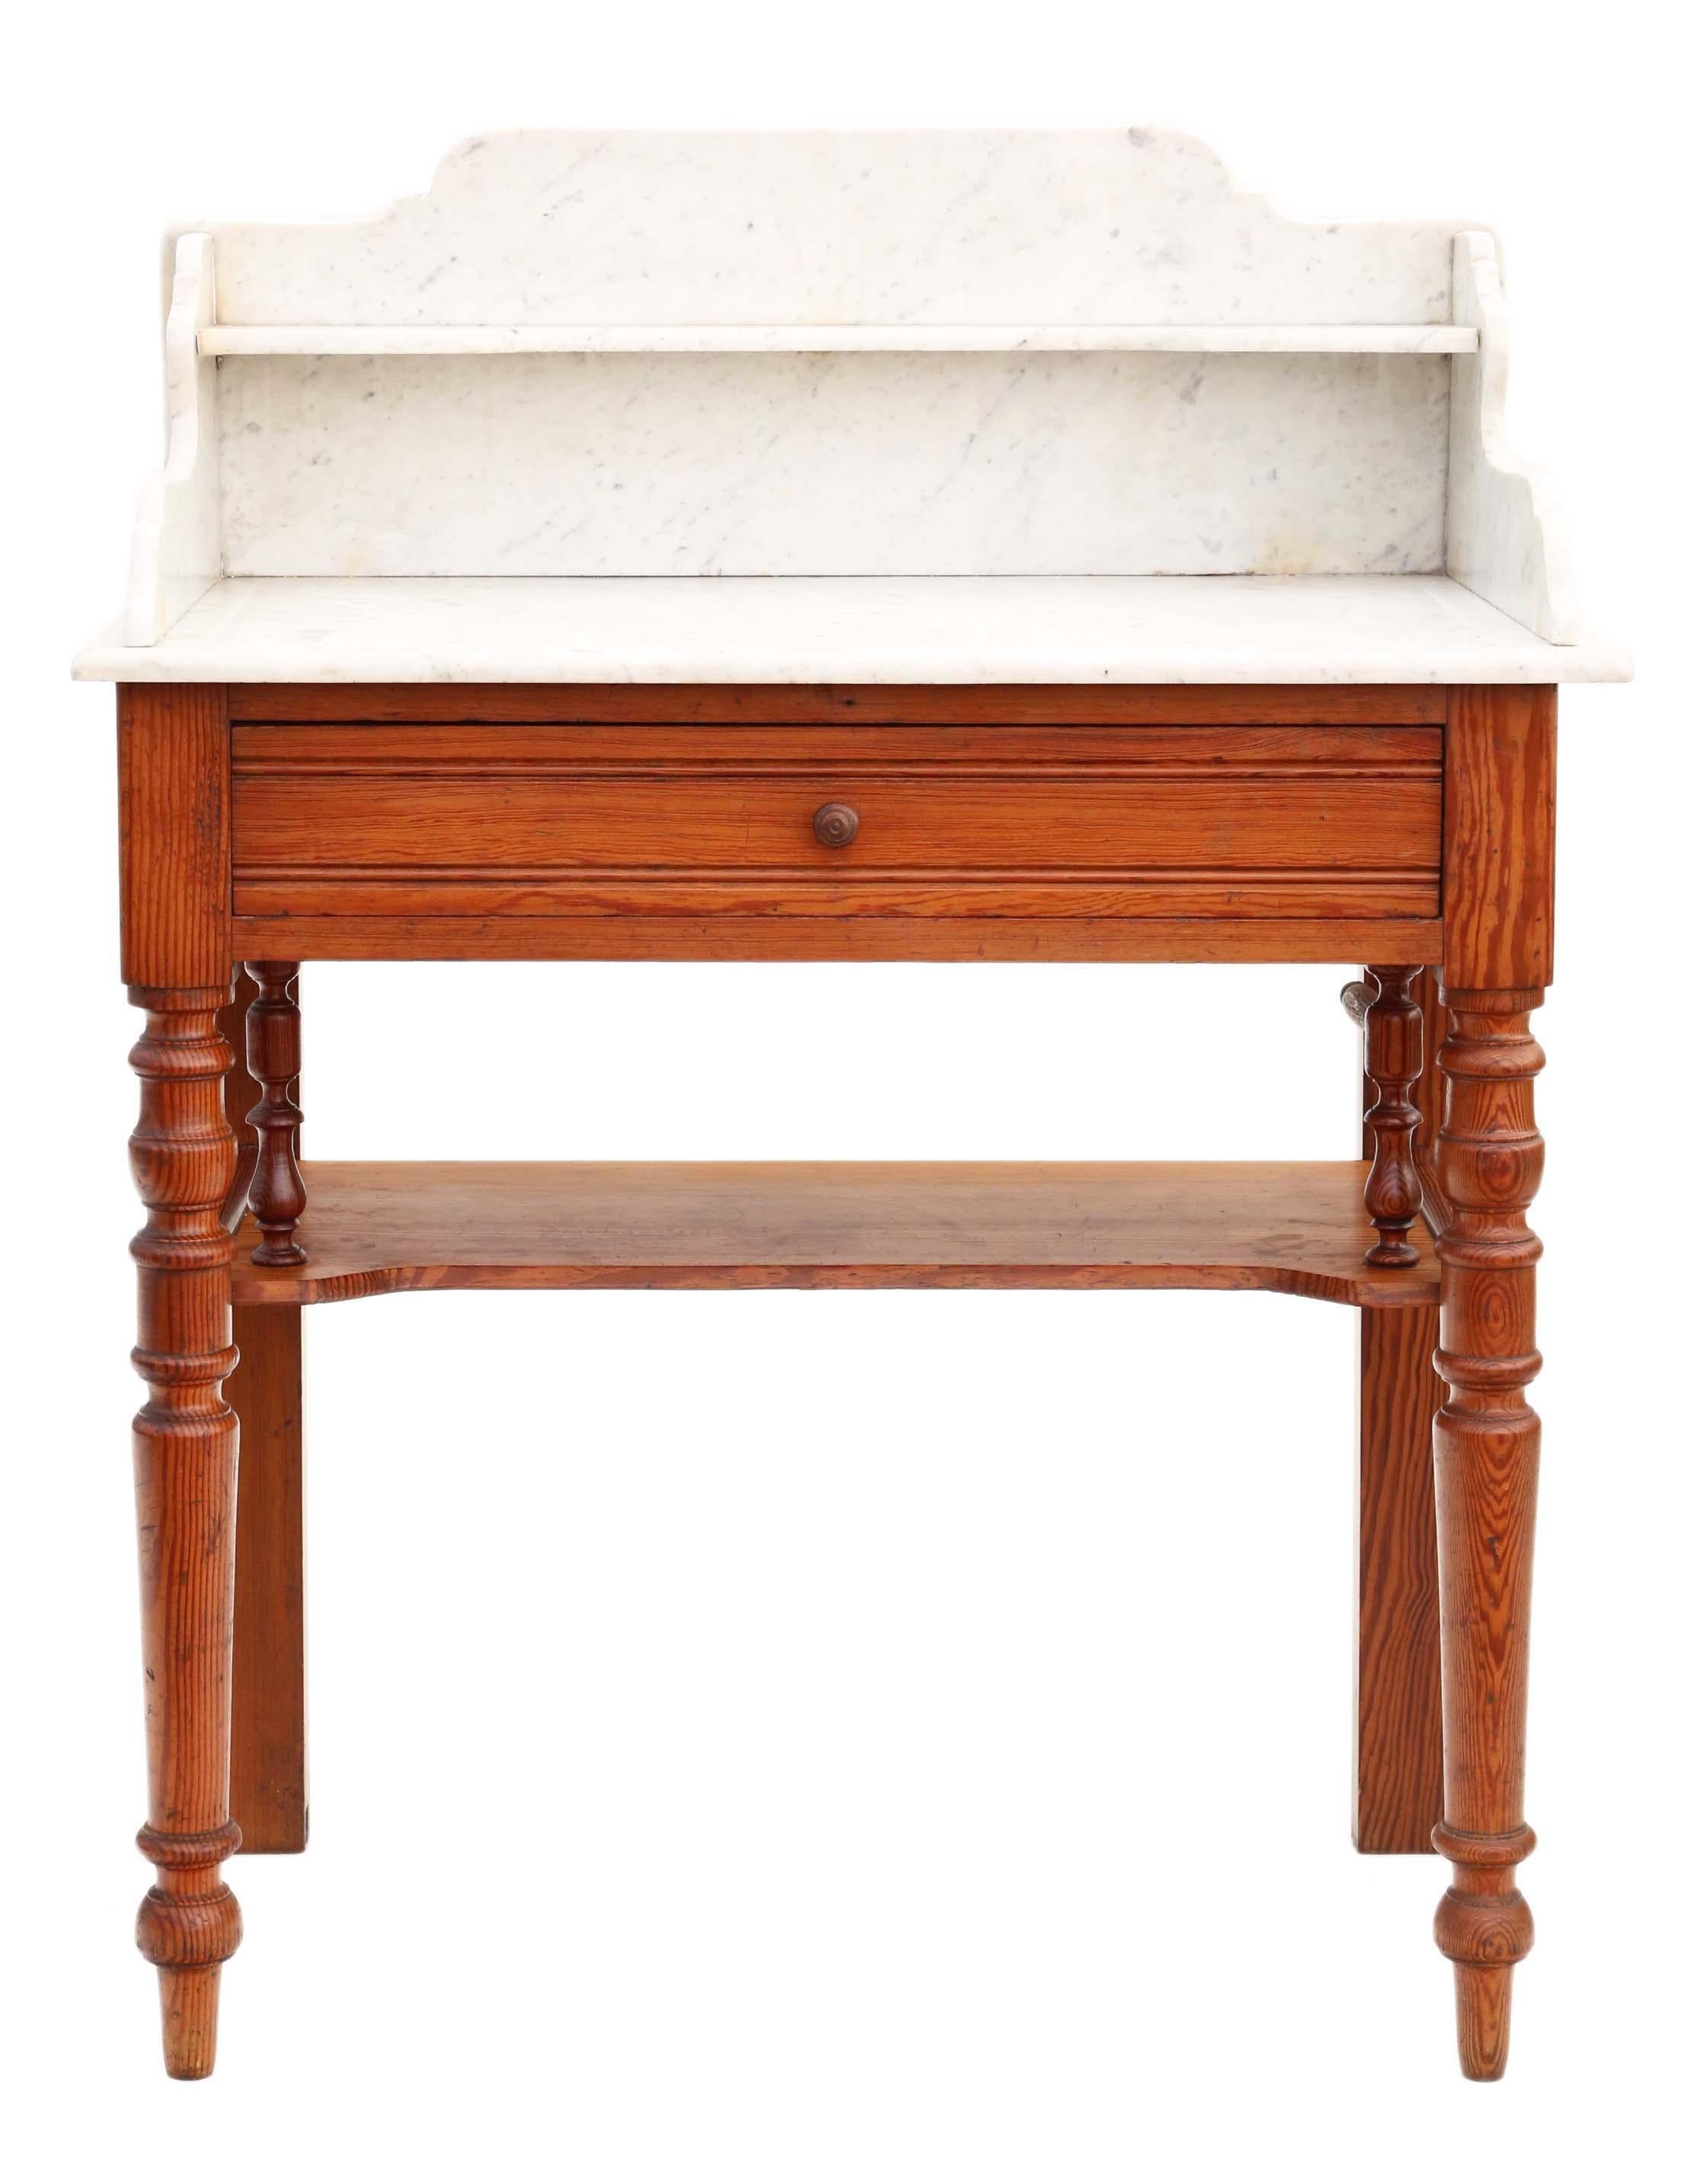 Antique fine quality pitch pine and marble wash stand C1900 with compact proportions. Just right for a smaller bathroom or basin conversion.

Solid and strong, with no loose joints or woodworm and in good working order. Has a drawer that slides